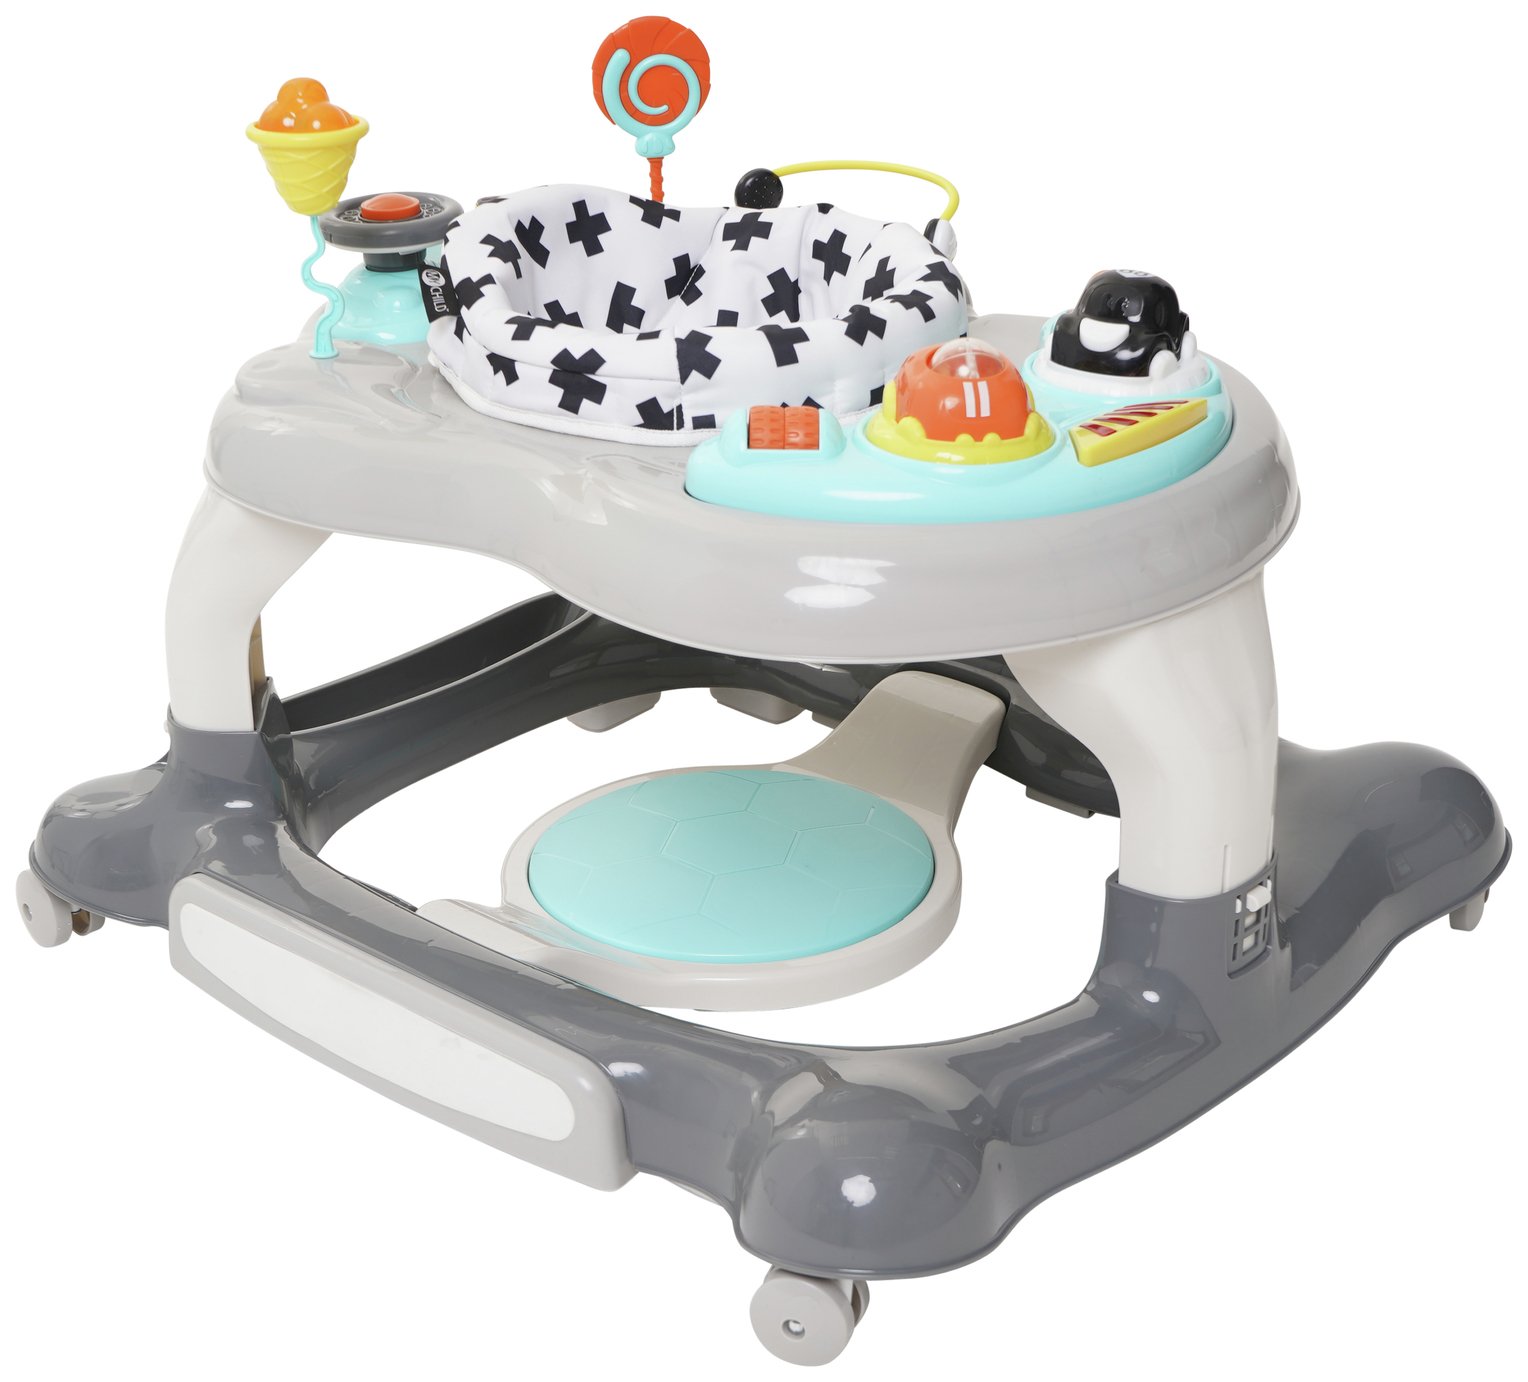 MyChild Roundabout 4-in-1 Walker review